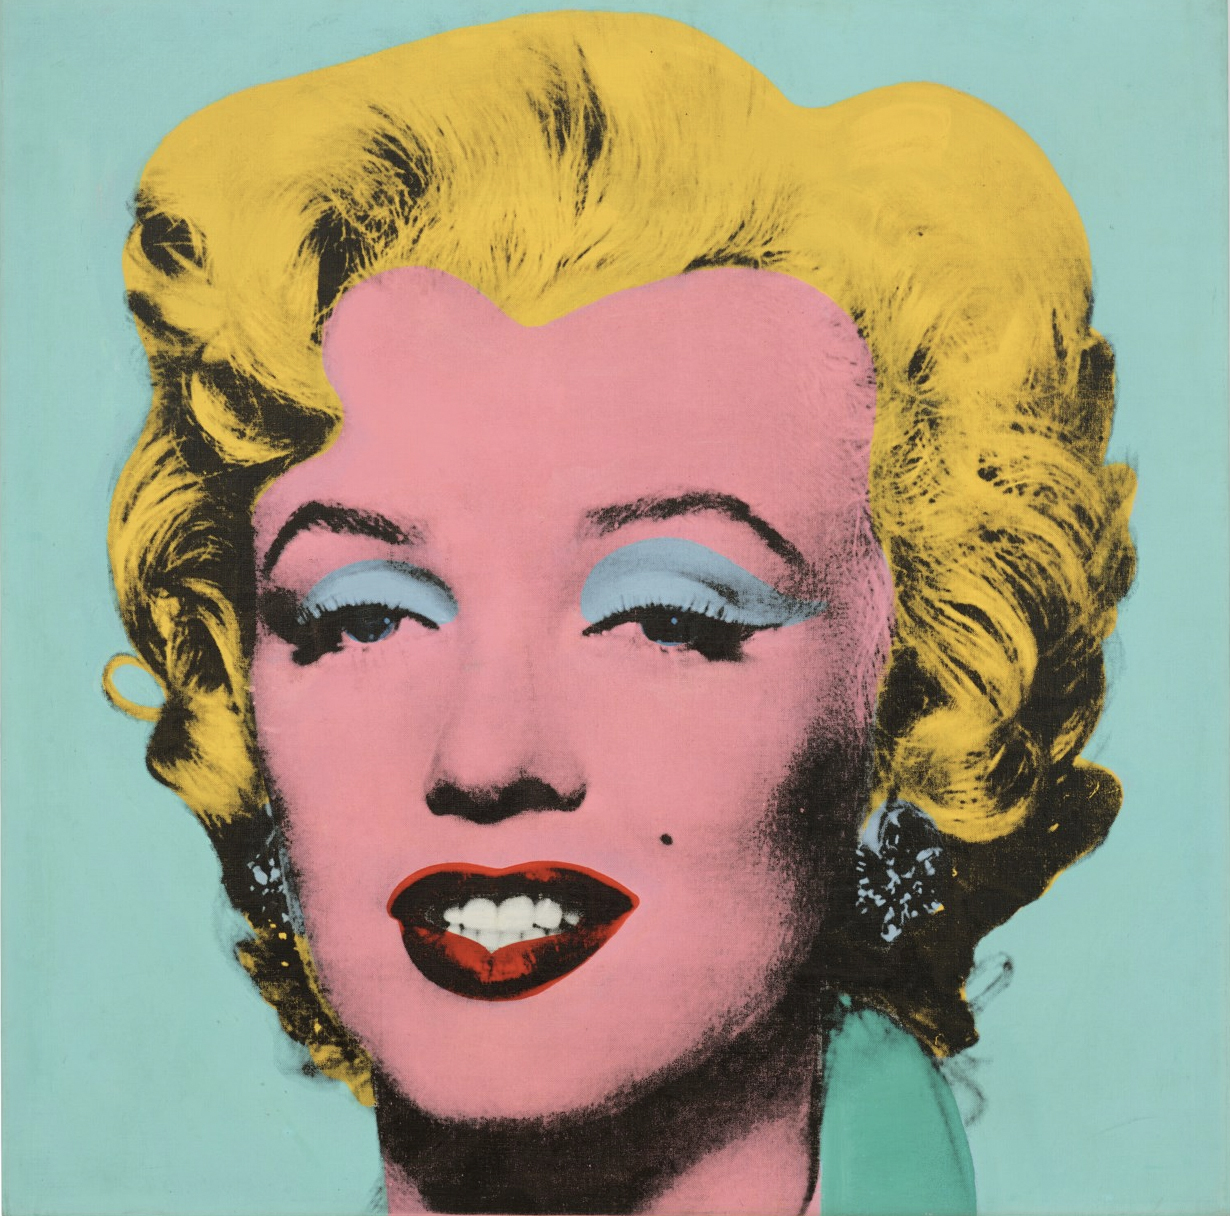 L’Observatoire : Andy Warhol domine les ventes